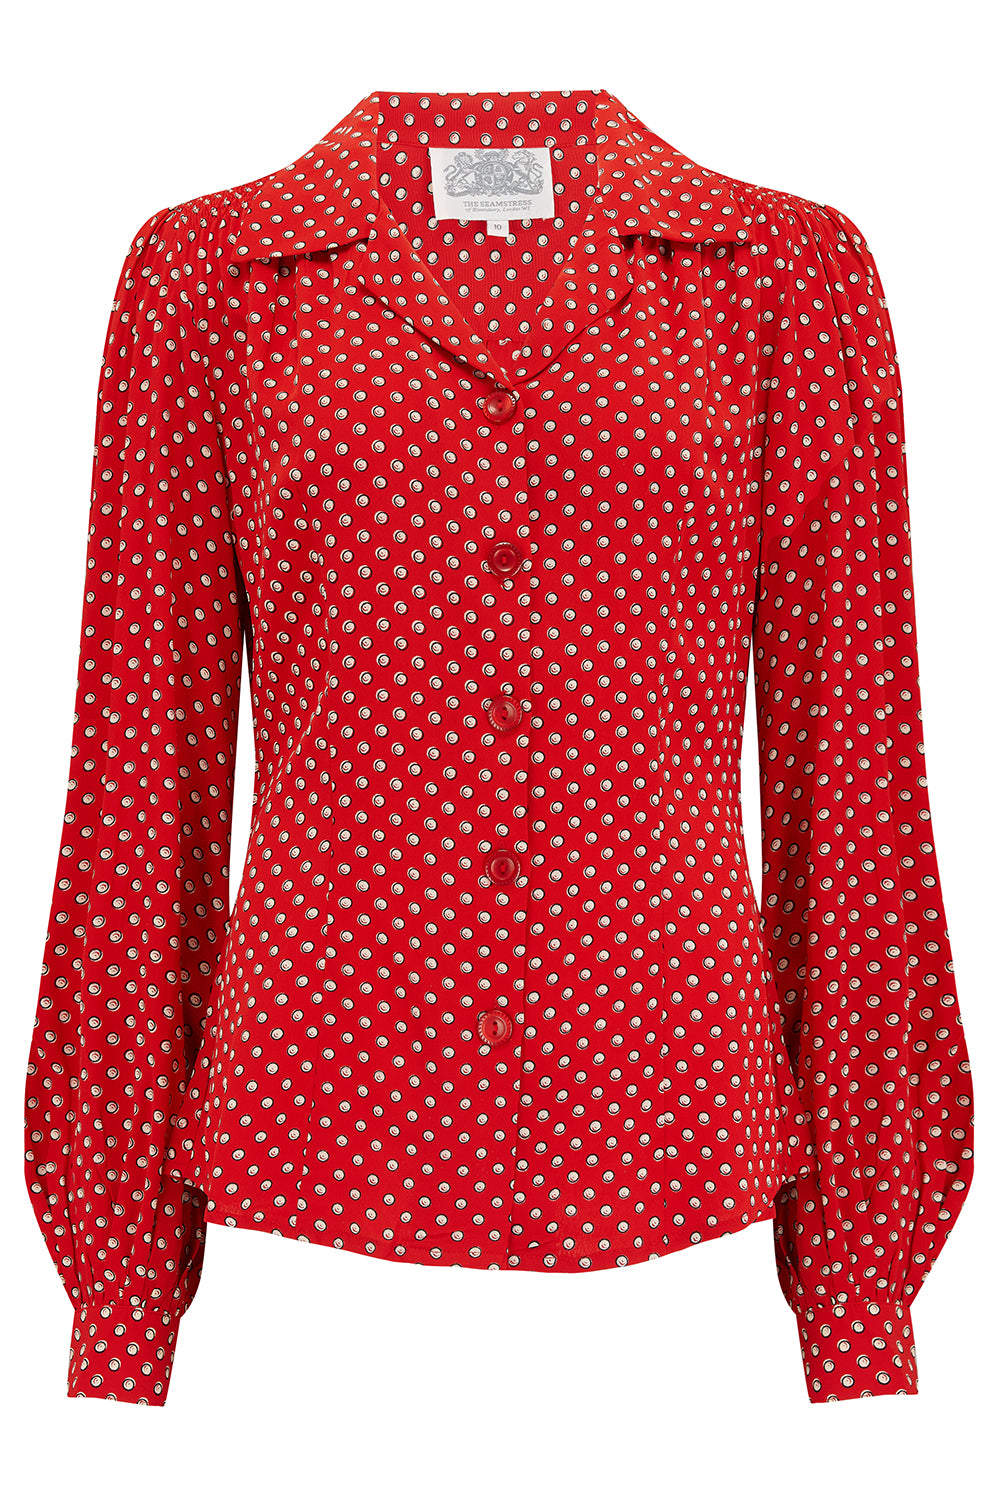 1940s Blouses, Tops, Shirts, Knitwear Poppy Long Sleeve Blouse in Red Ditzy Dot  Authentic  Classic 1940s Vintage Style £49.00 AT vintagedancer.com